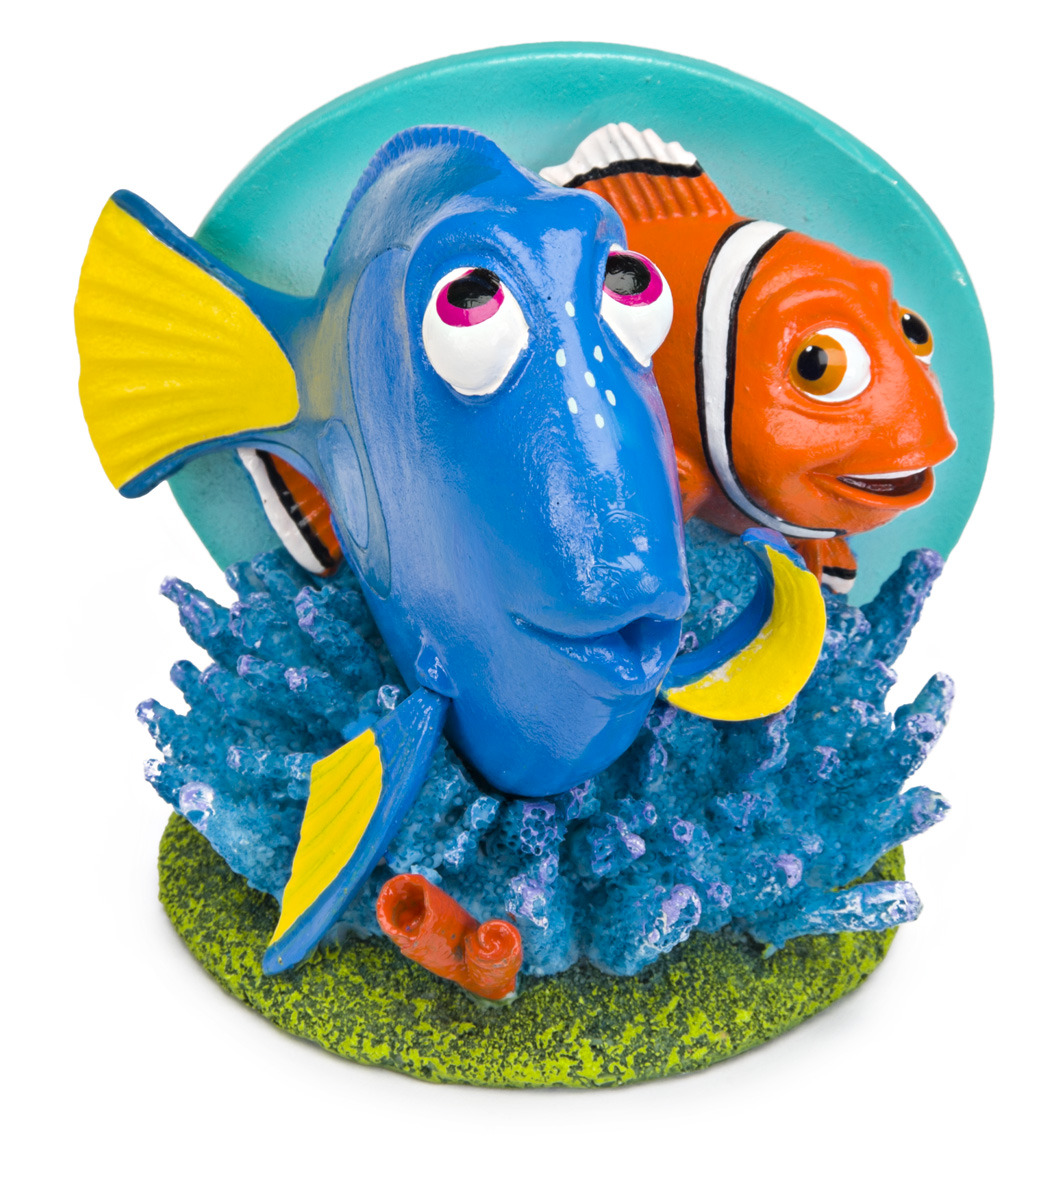 Penn Plax Nmr11 Finding Nemo Resin Ornament For Aquariums, Dory And Marlin, 4 In.